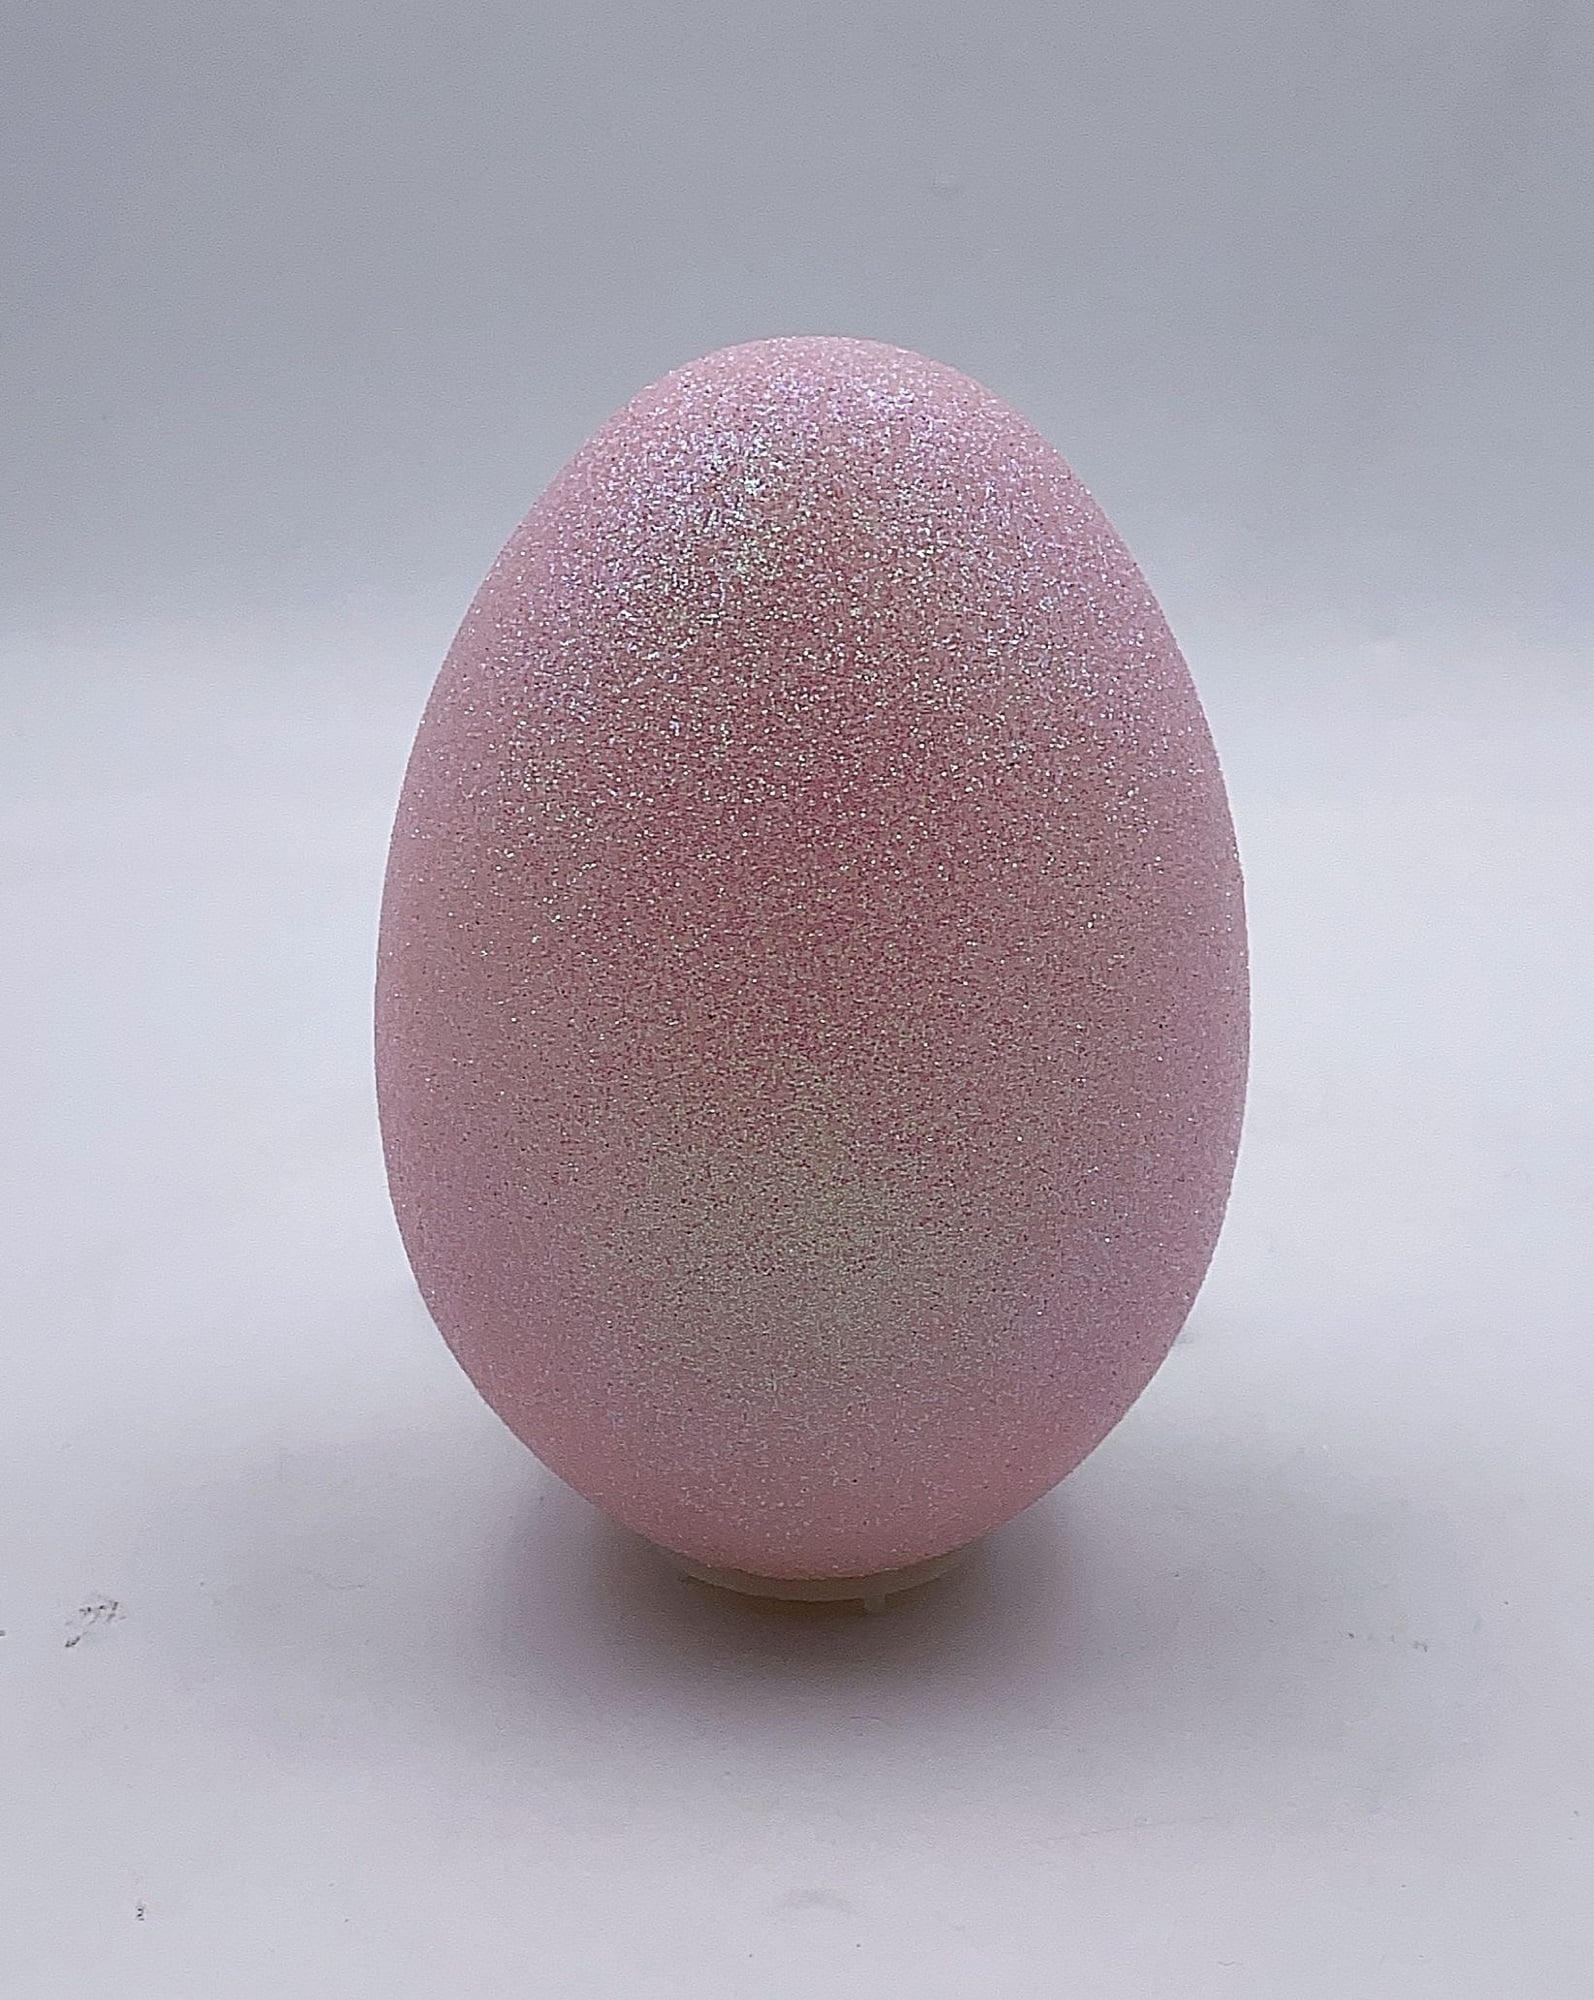 WAY TO CELEBRATE! Way To Celebrate Easter 5-inch Height Pink Glitter Plastic Egg Indoor Decor